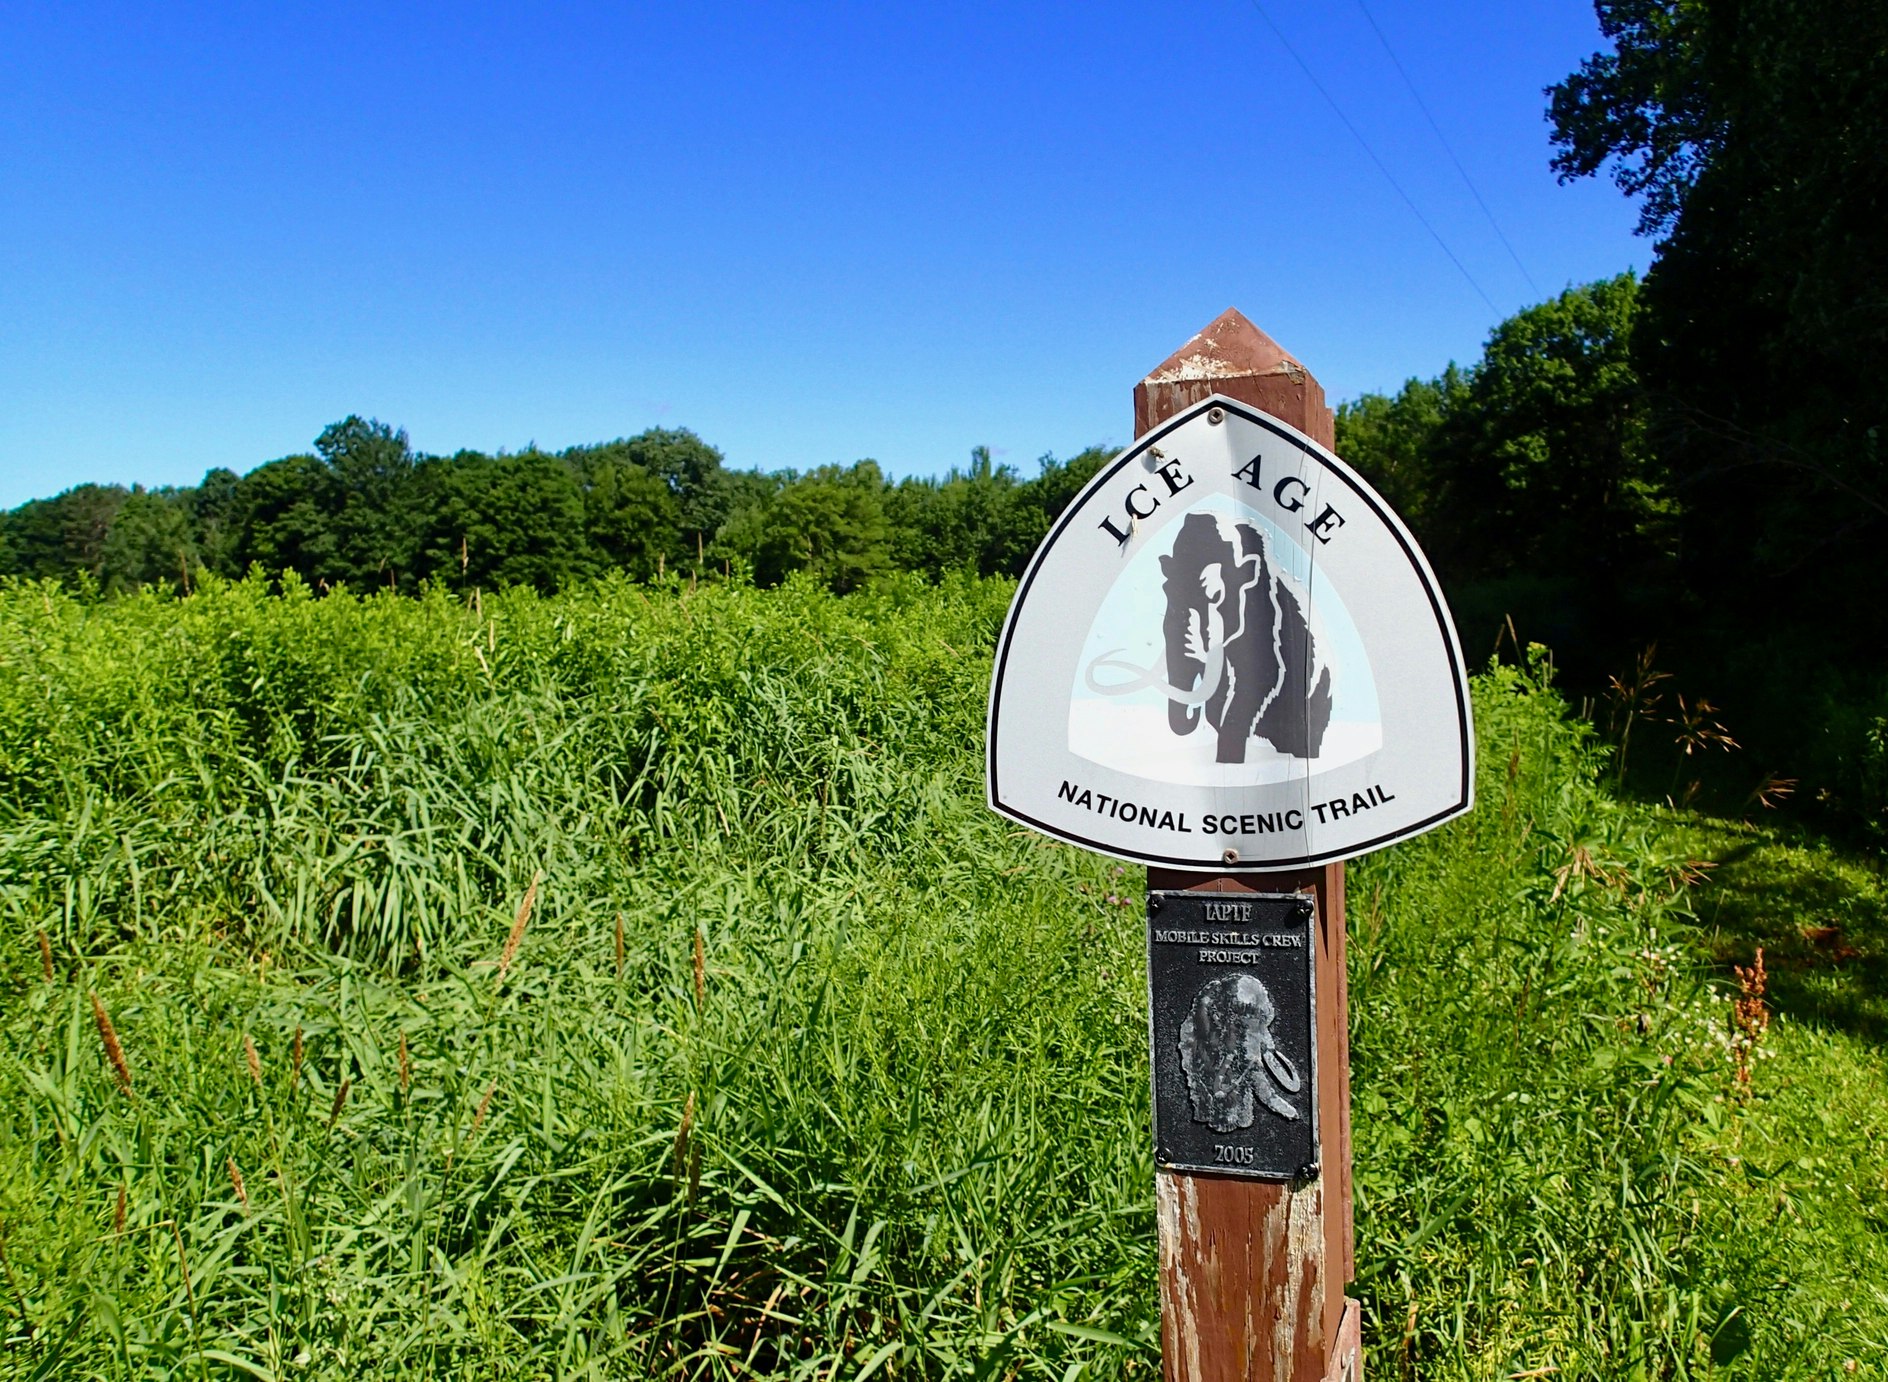 A sign saying "Ice Age National Scenic Trail" marks the hiking route across Wisconsin